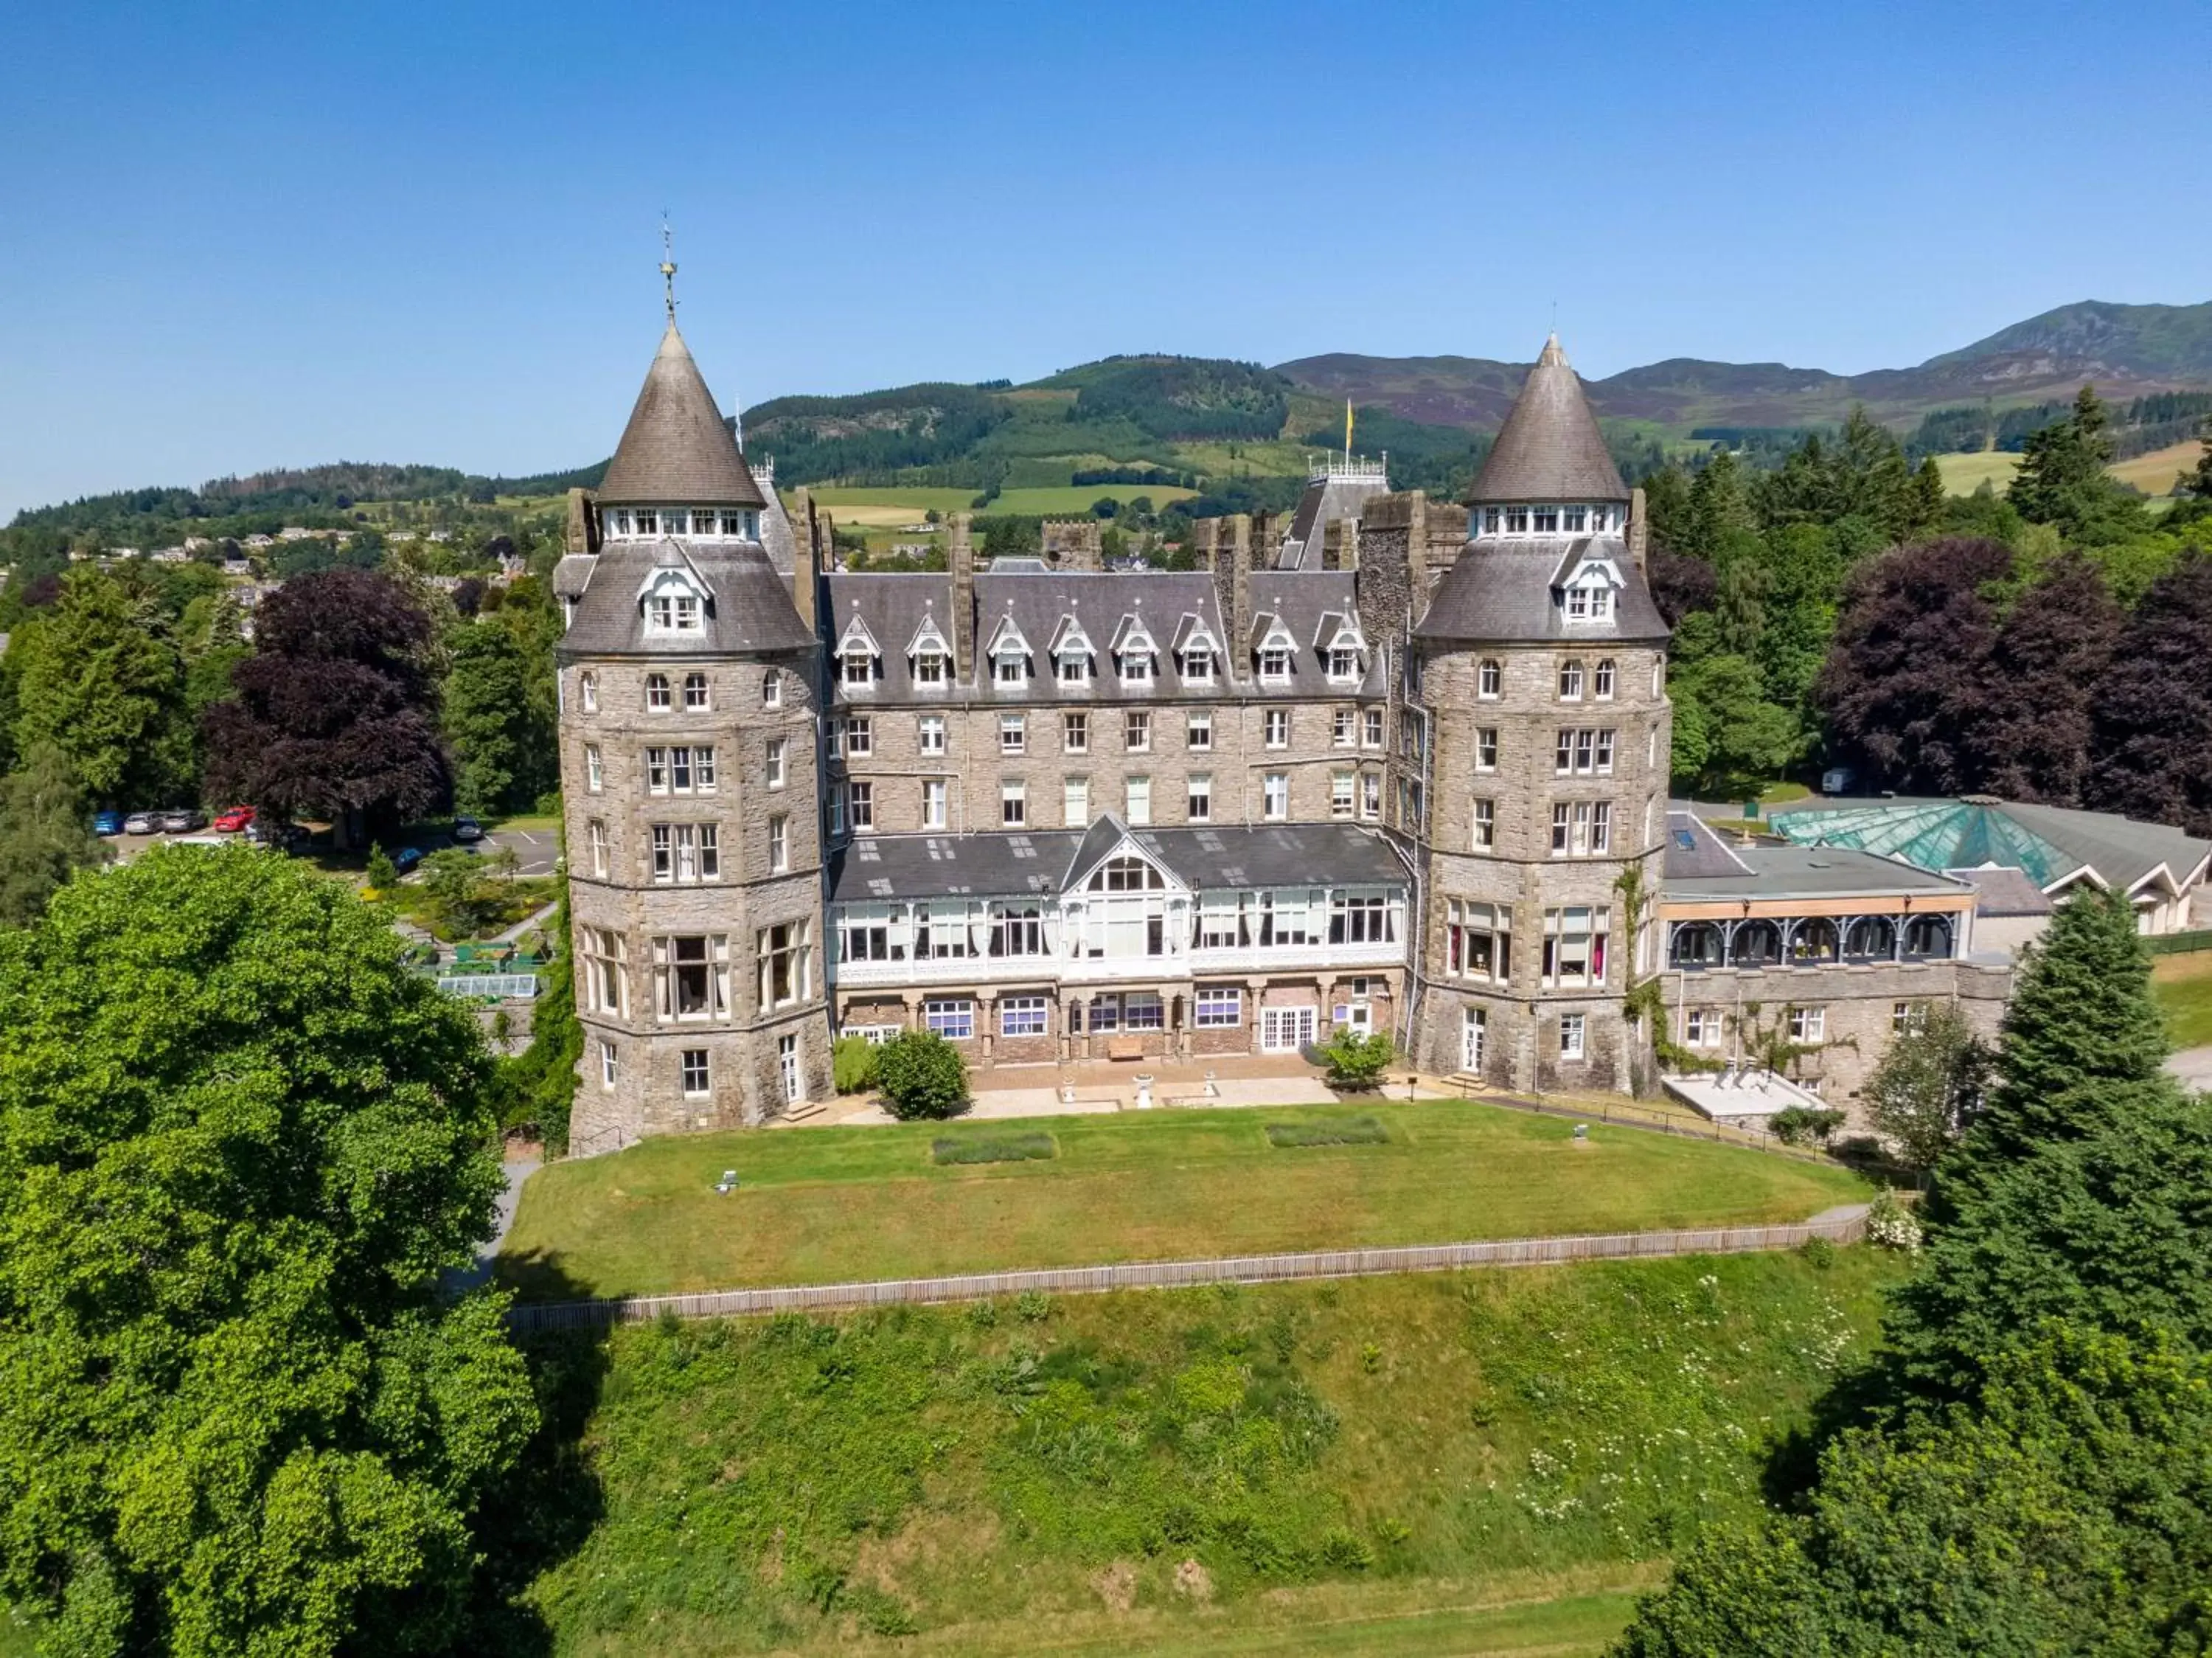 Property building in The Atholl Palace